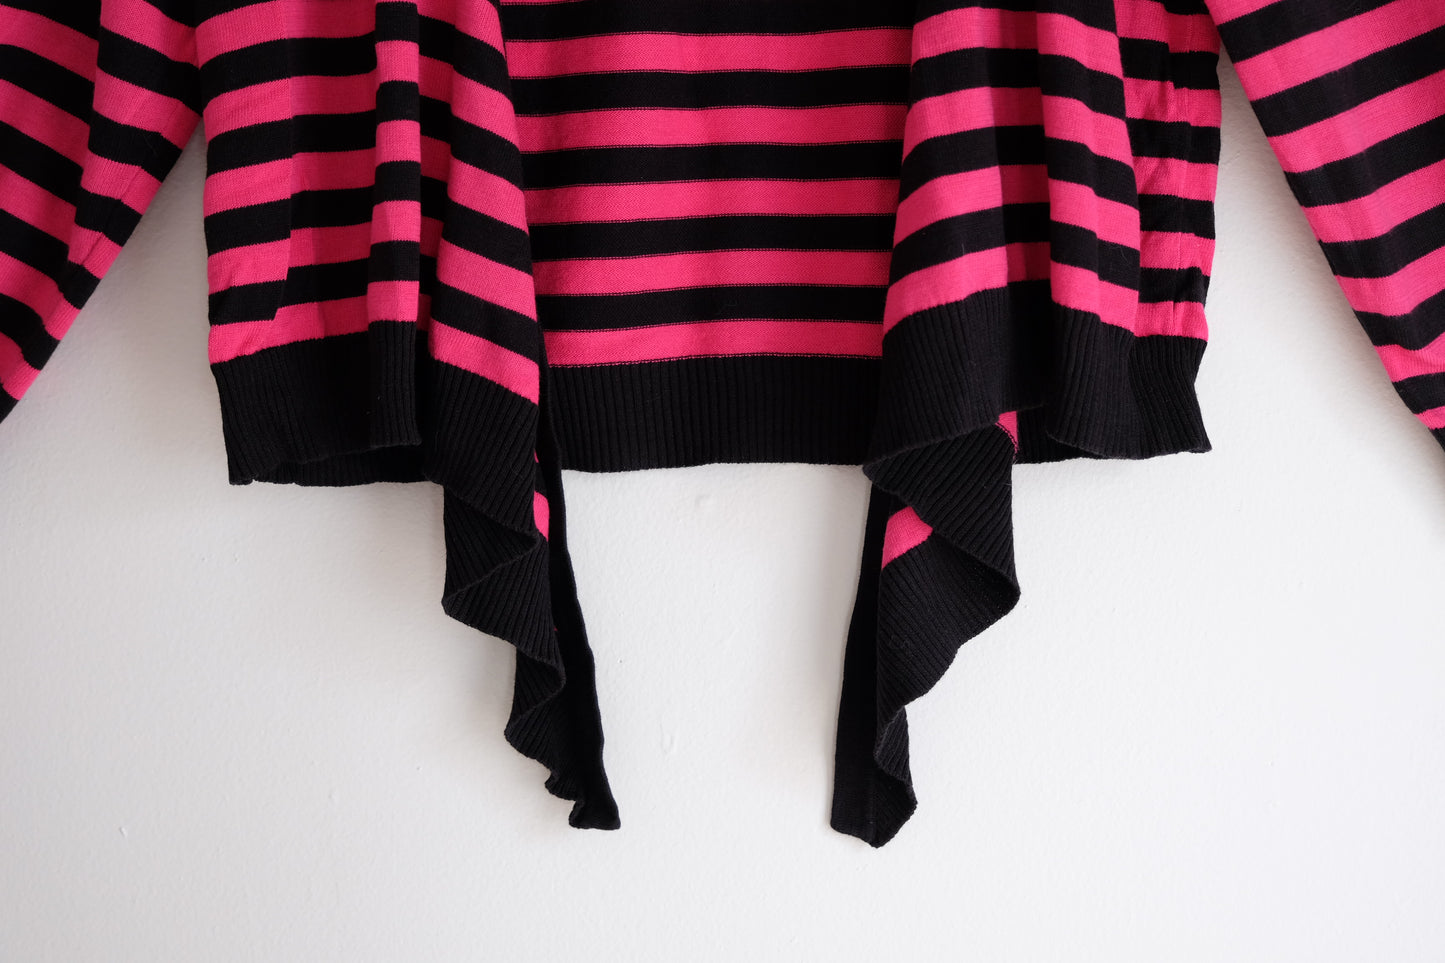 [frizzy finds] pink + black cropped sweater